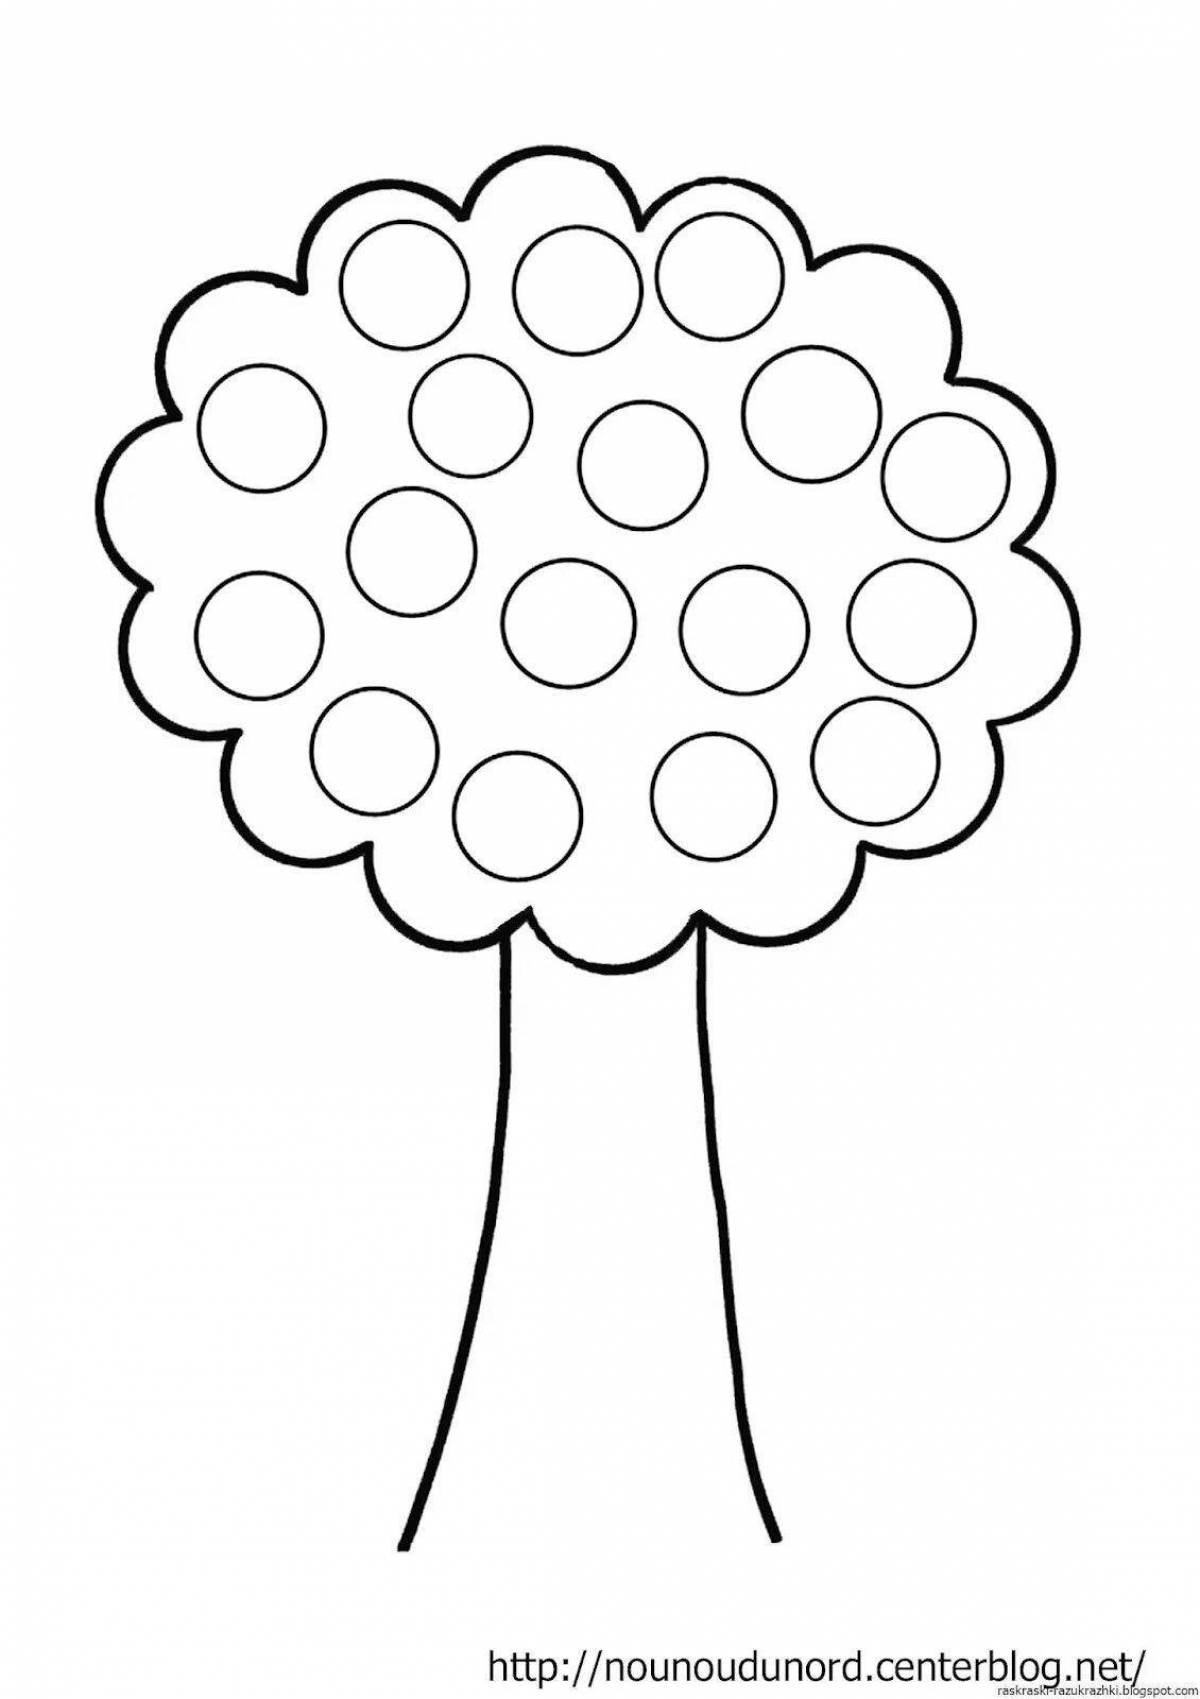 Colorful finger coloring page for 2 year olds